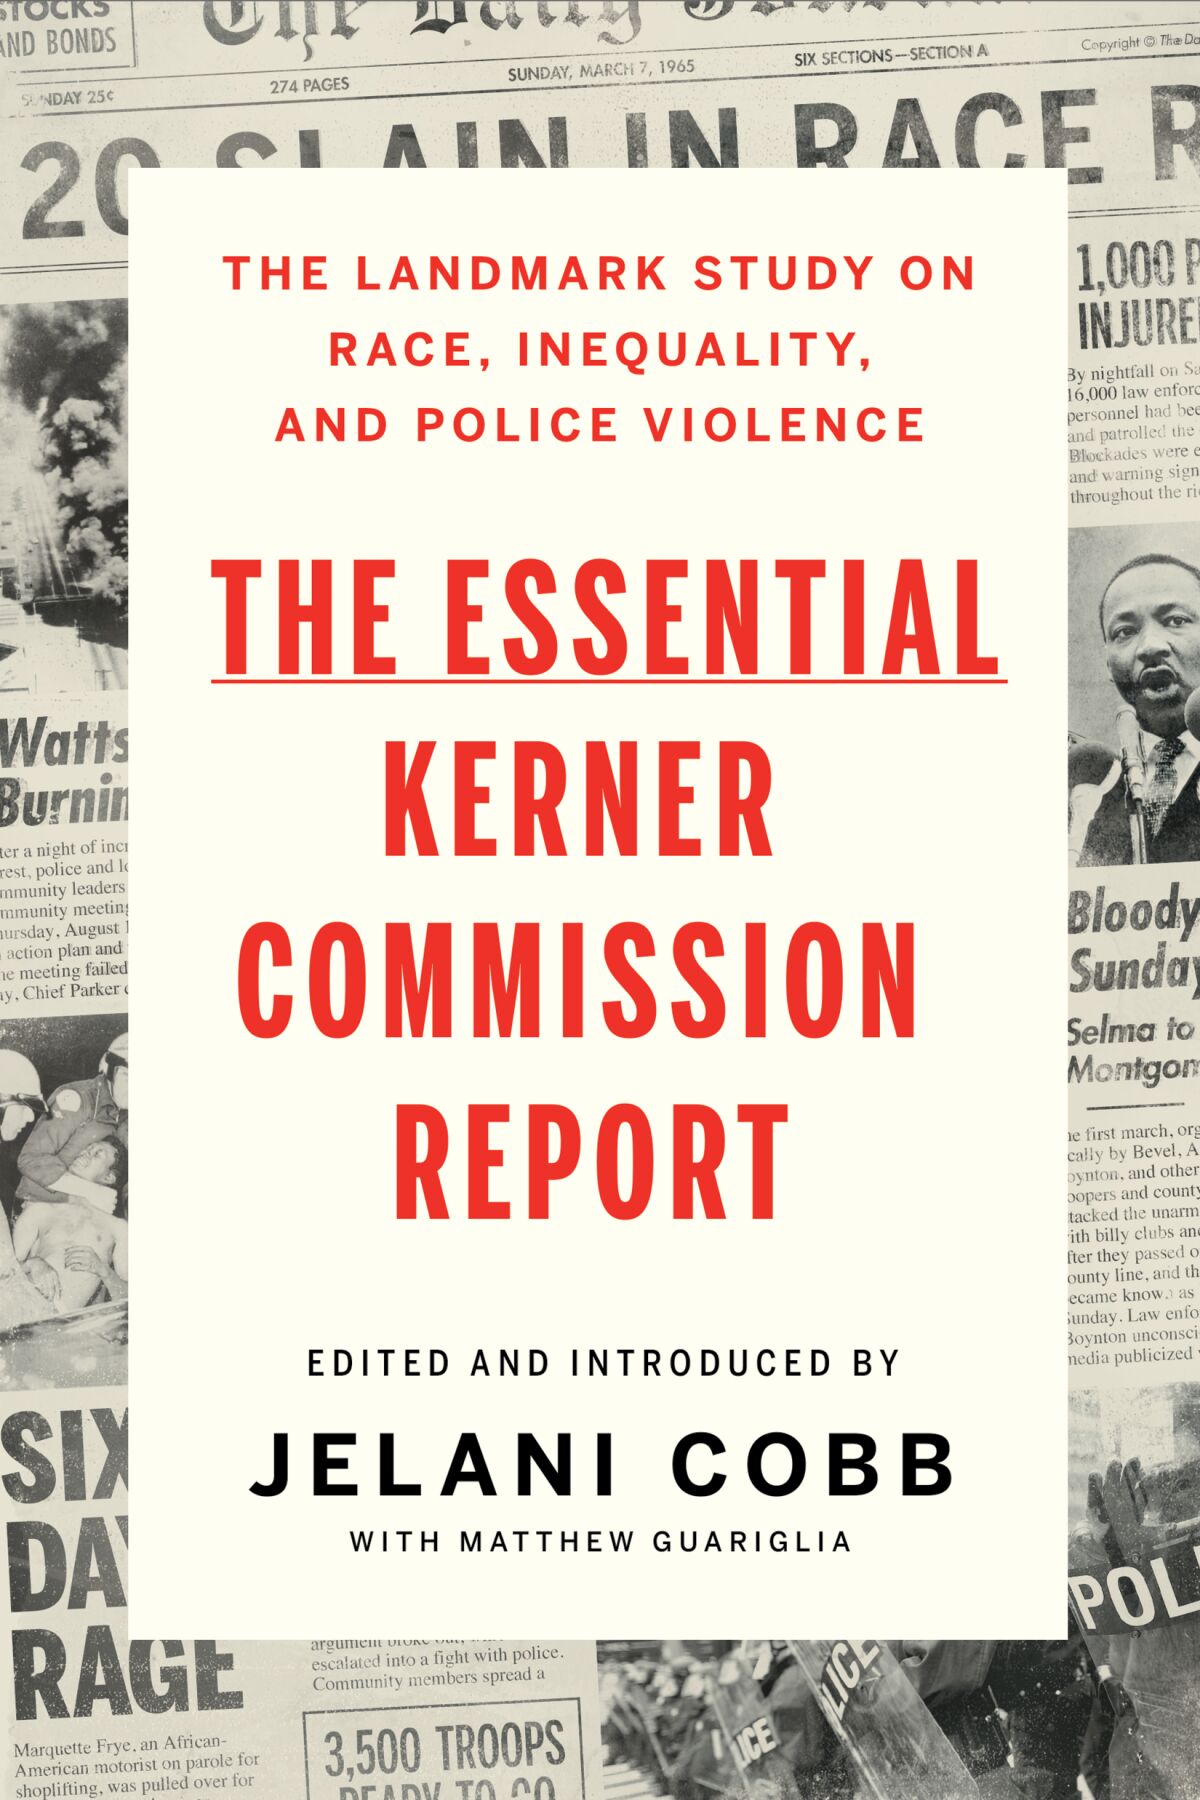 "The Essential Kerner Commission Report," edited by Jelani Cobb and Matthew Guariglia